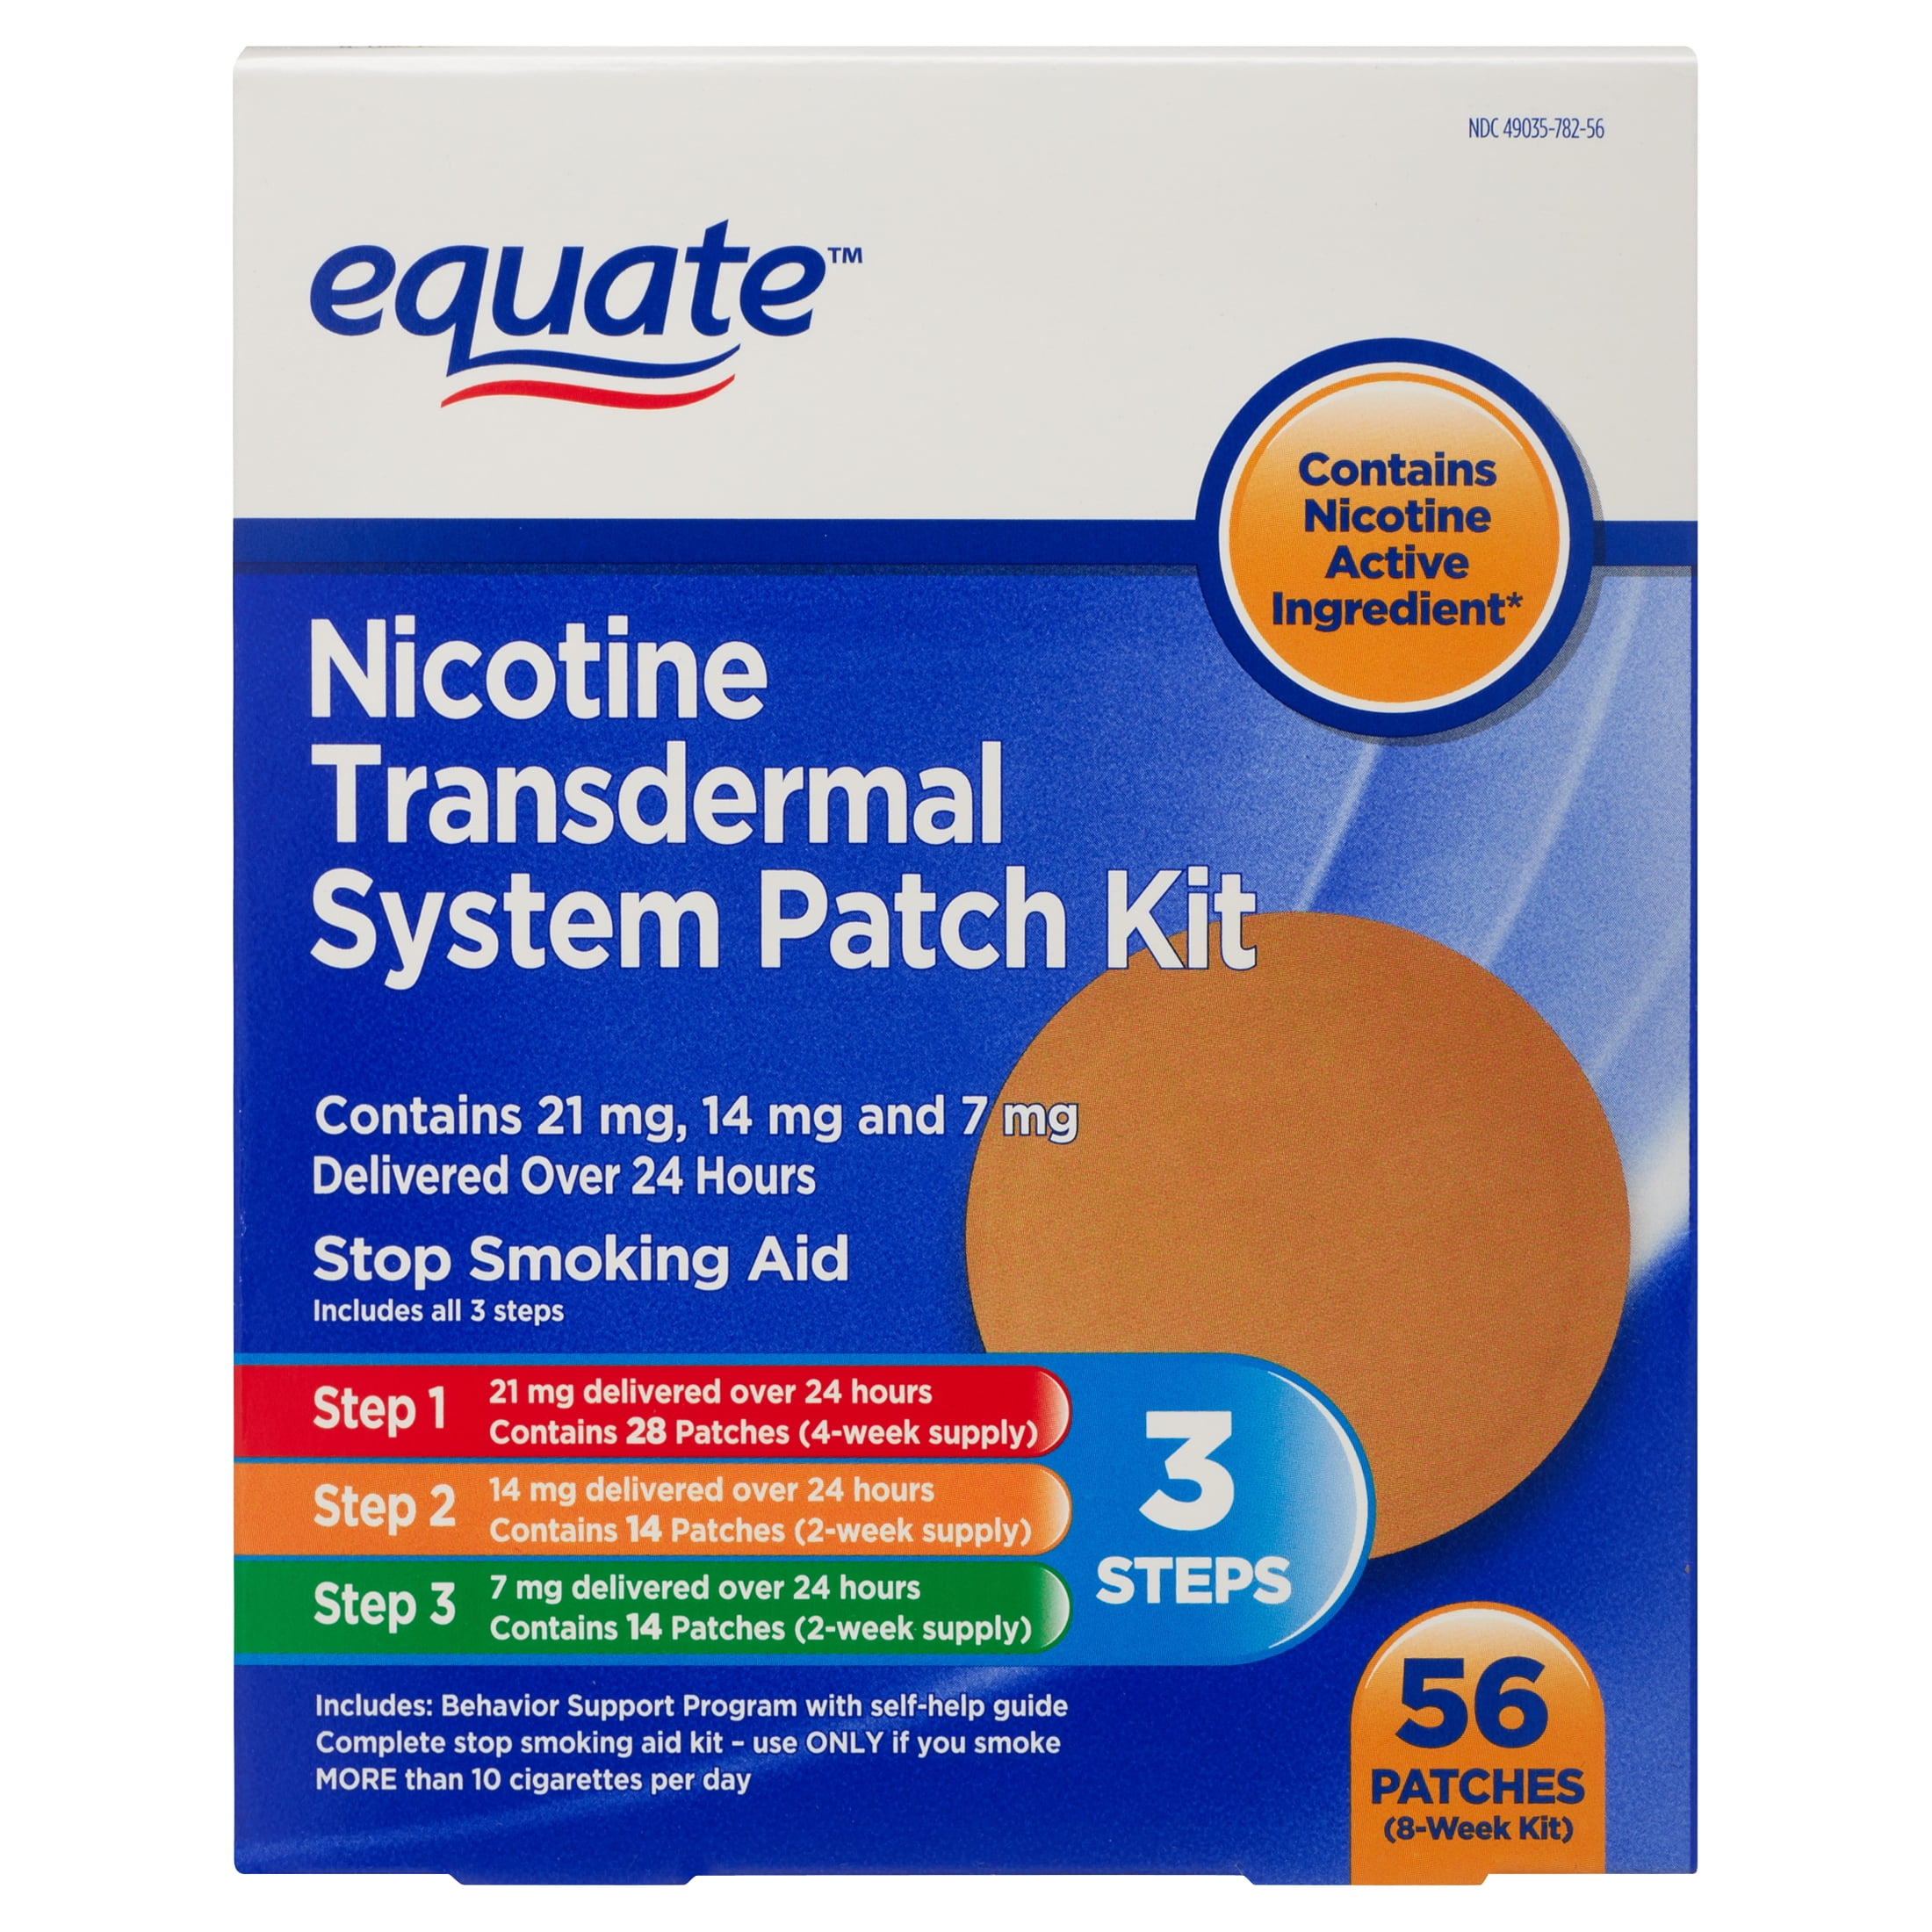 Are Nicotine Patches Over the Counter?